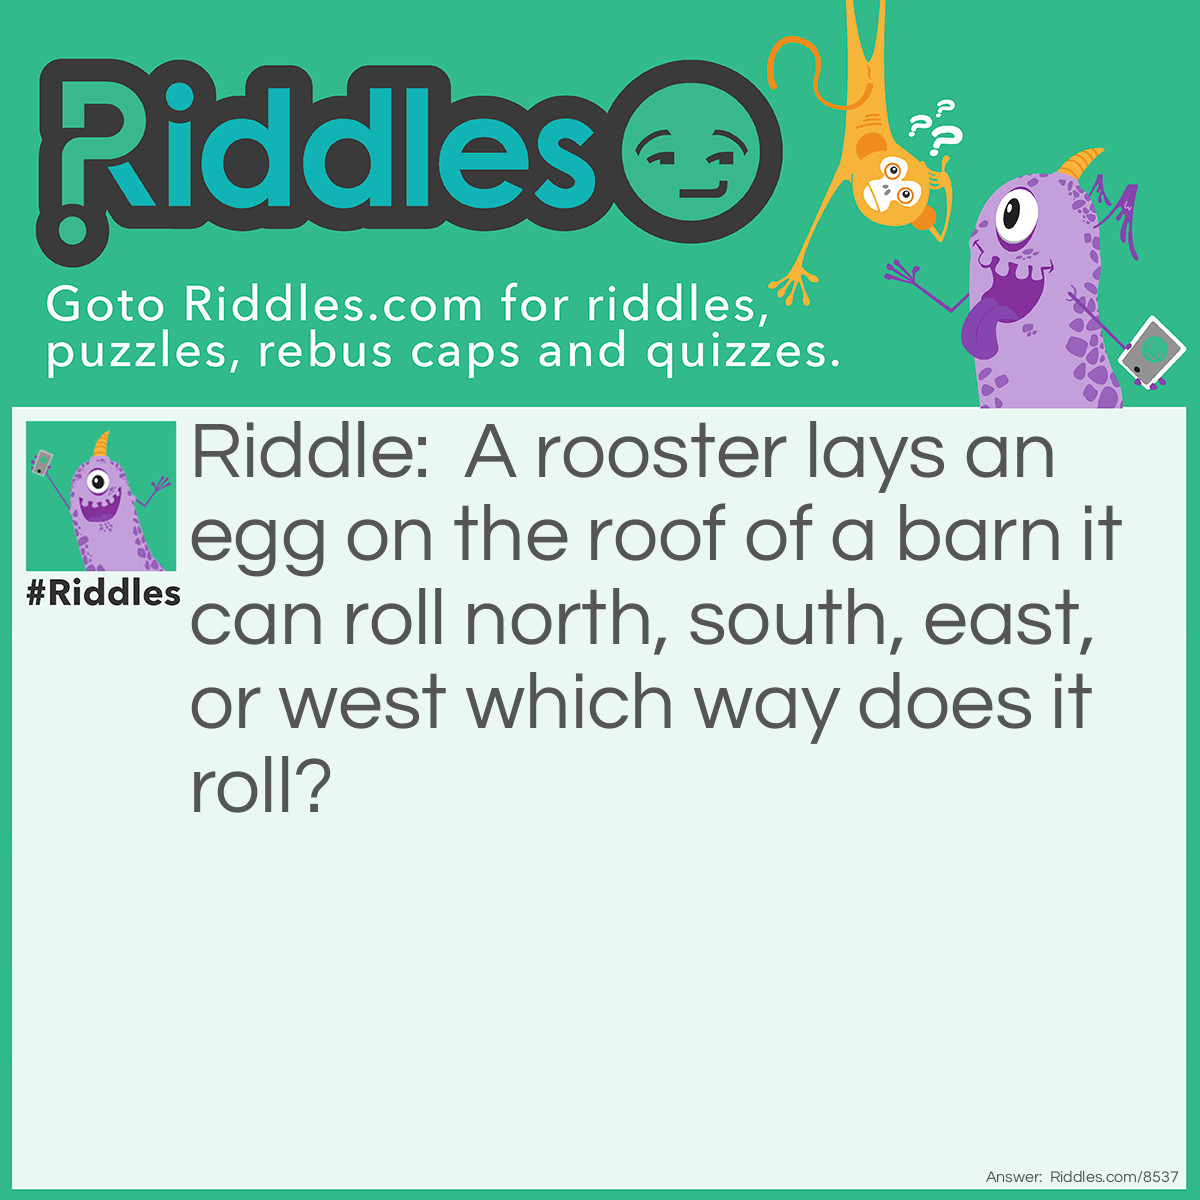 Riddle: A rooster lays an egg on the roof of a barn it can roll north, south, east, or west which way does it roll? Answer: roosters don't lay eggs chickens do!!!